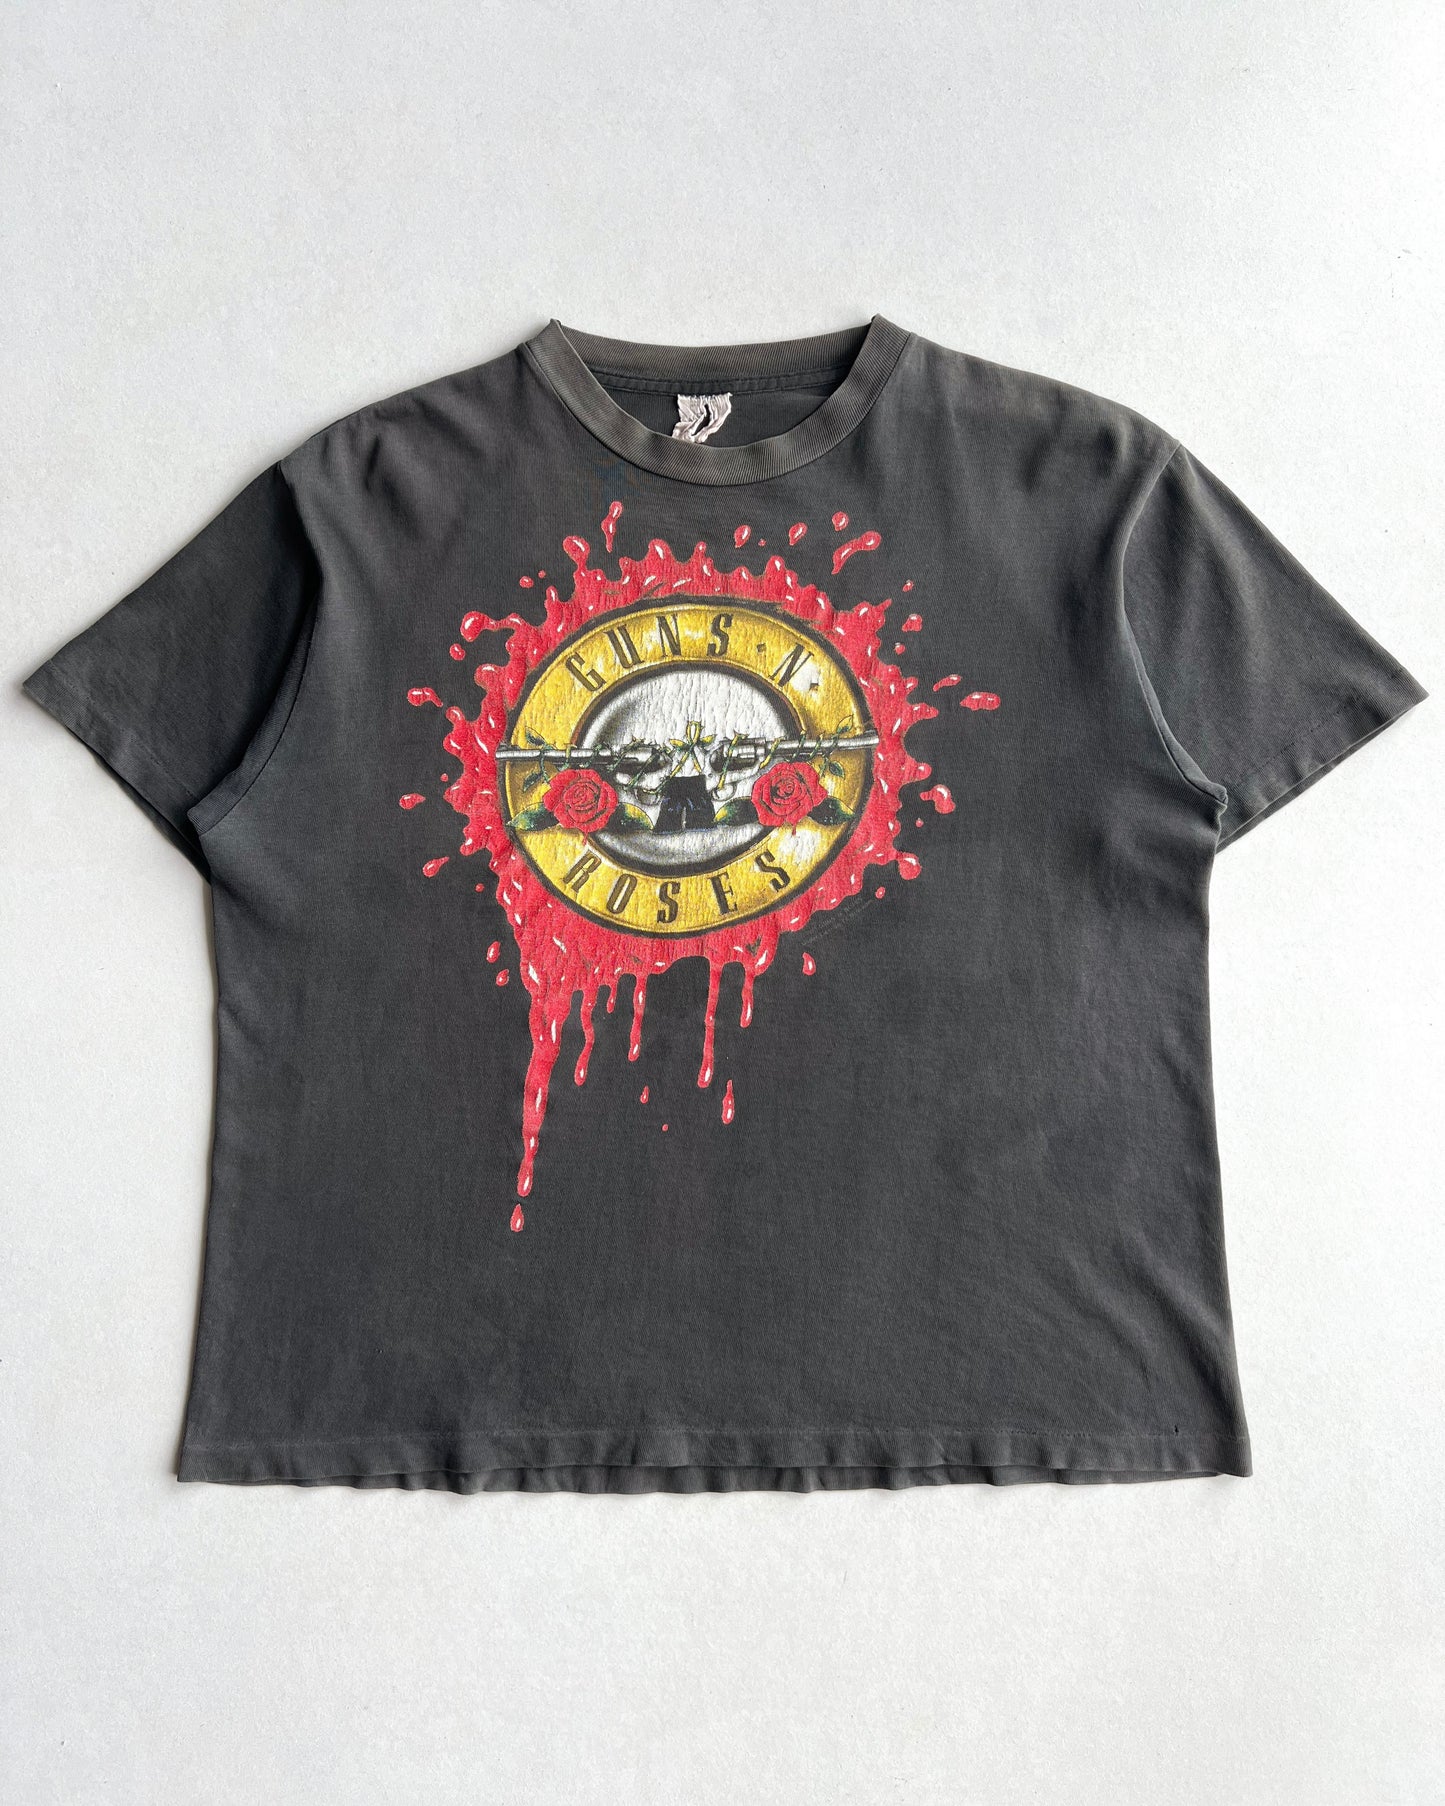 1990S GUNS & ROSES 'GET IN THE RING' TOUR TEE (M)